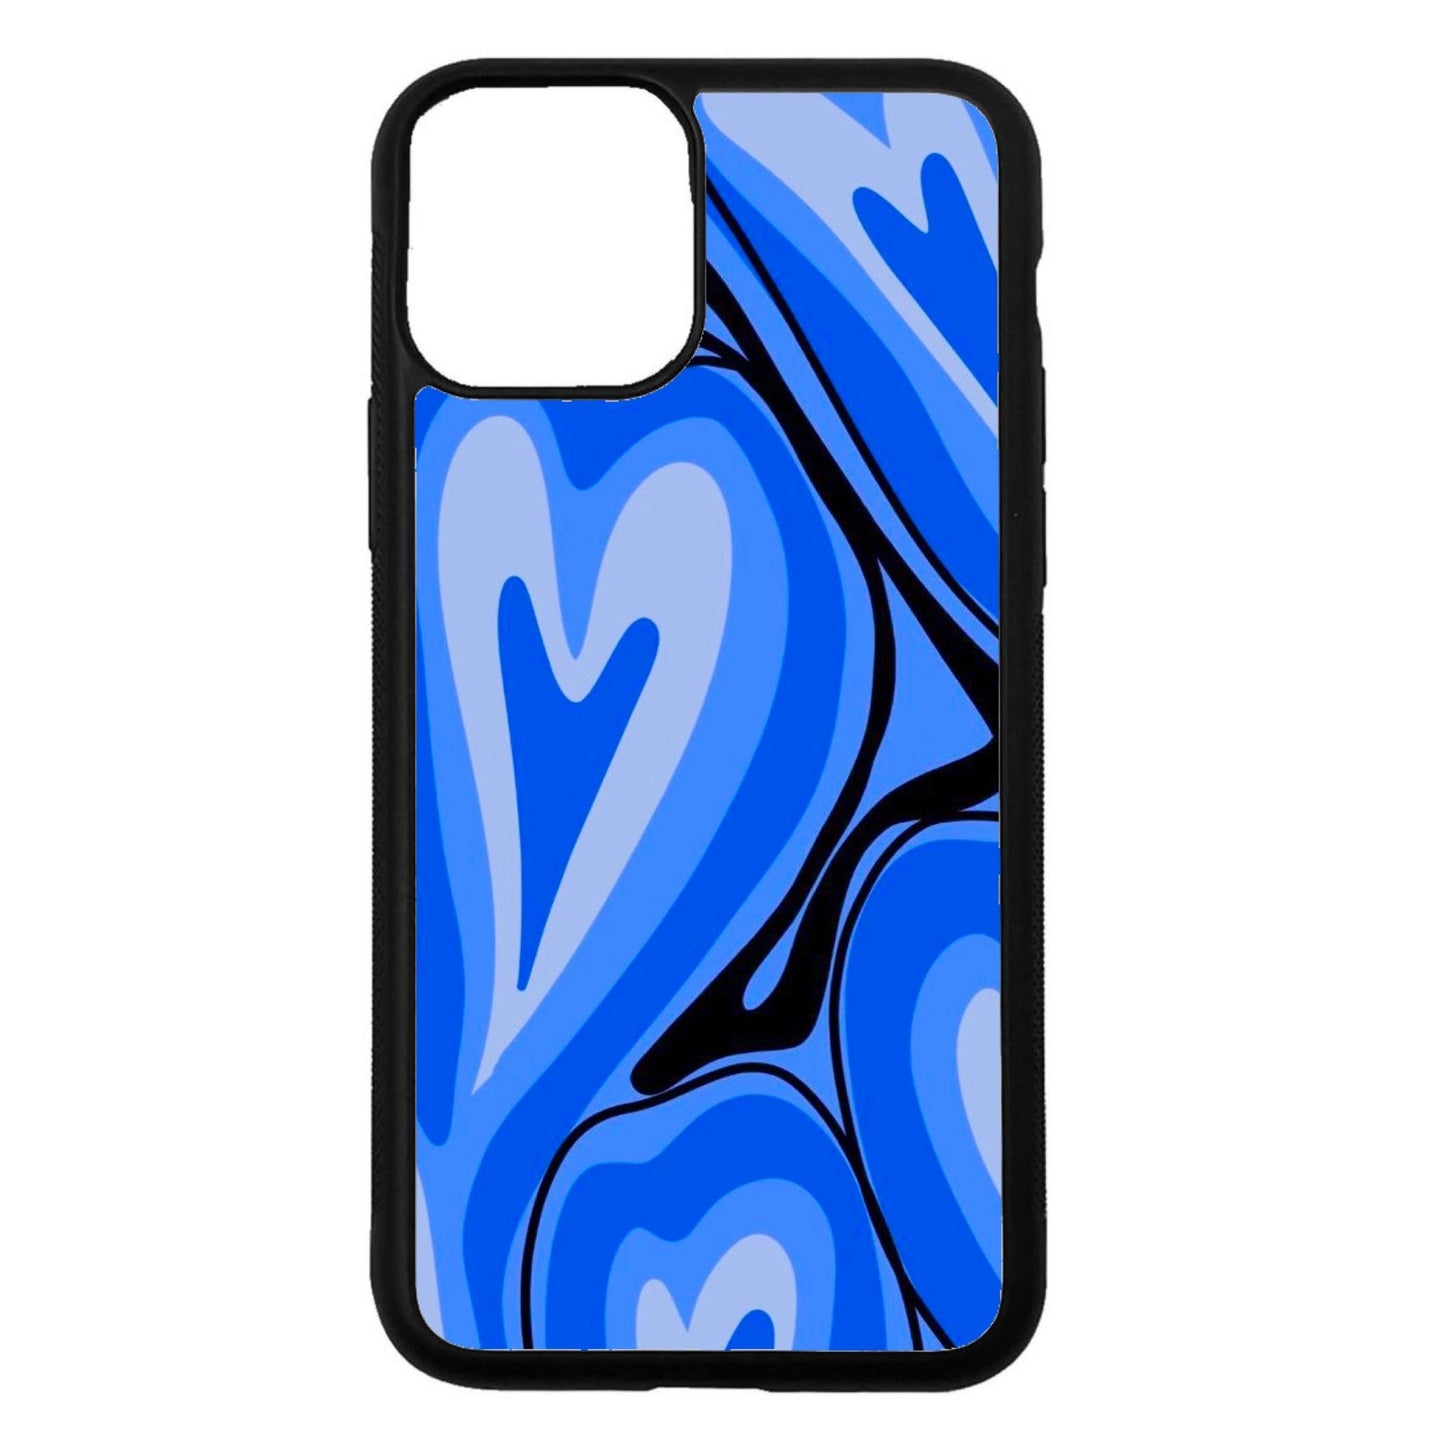 distorted hearts - Mai Cases